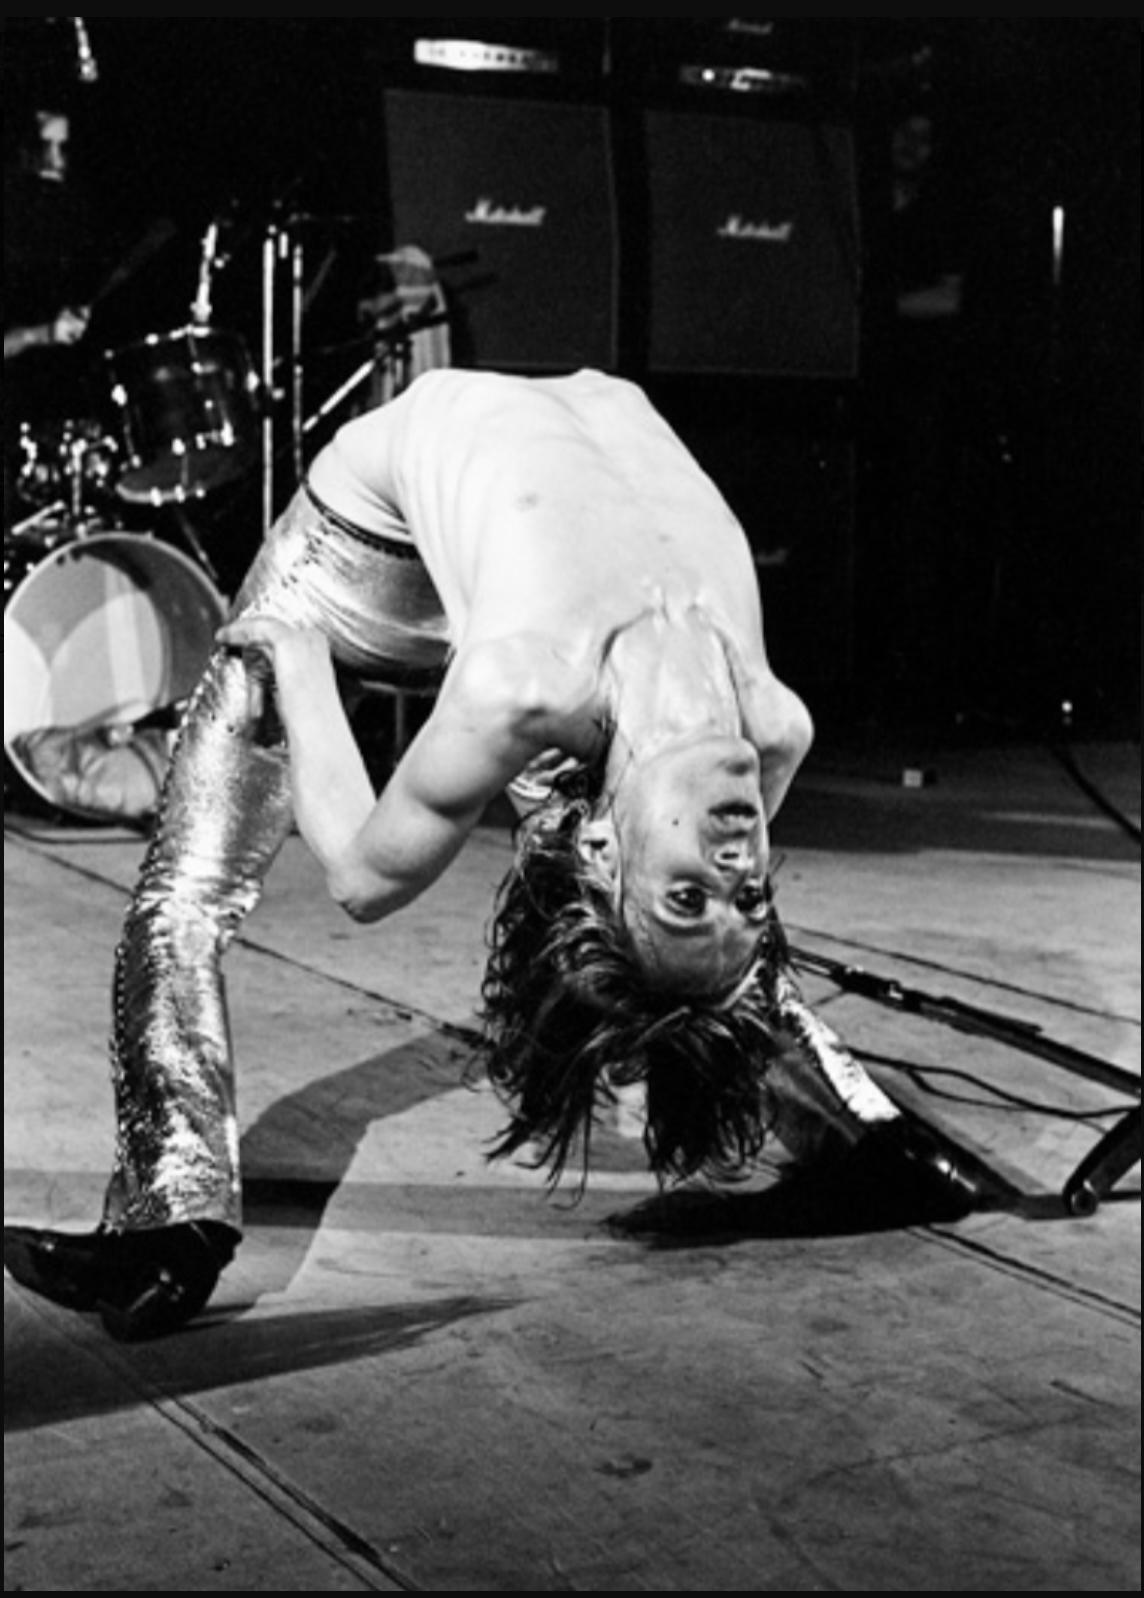 "Iggy Backbend, London, 1972" Photography 24" x 20" inch 29/50 by Mick Rock

Edition: 29/50
Medium: Silver gelatin limited edition photographic print on paper

Iggy and The Stooges were highly influential in the development of punk rock and